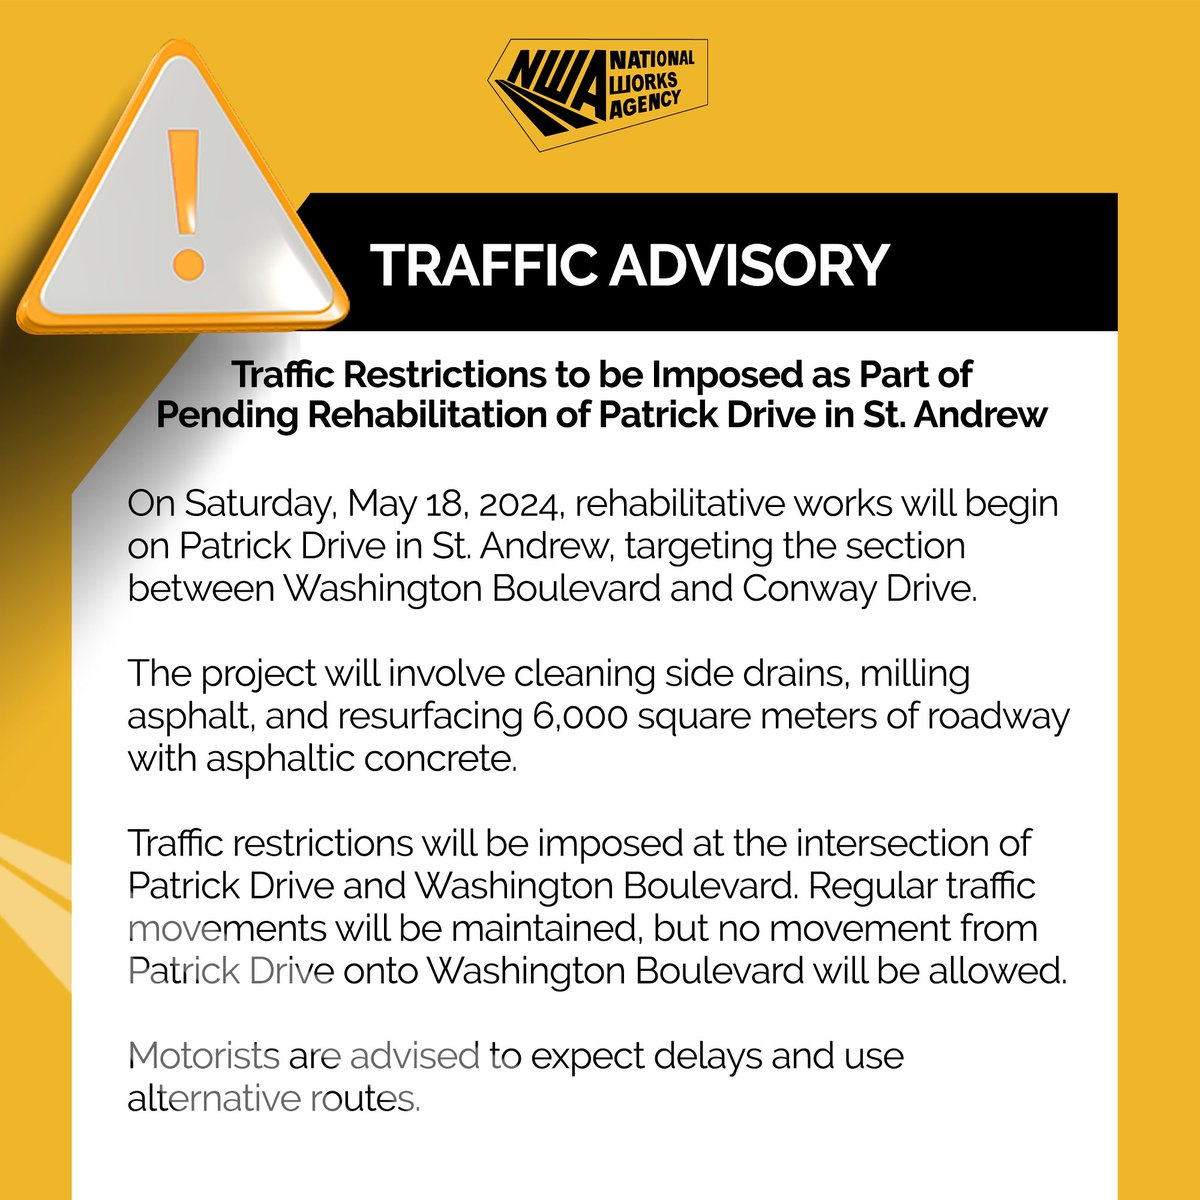 🚧Traffic Advisory🚧 Starting Saturday, May 18, 2024, rehabilitative work will begin on Patrick Drive, St. Andrew. Motorists should expect delays due to construction and are advised to use alternative routes where possible. #TrafficUpdate #NWA #Jamaica #DuhRoadWithNWA